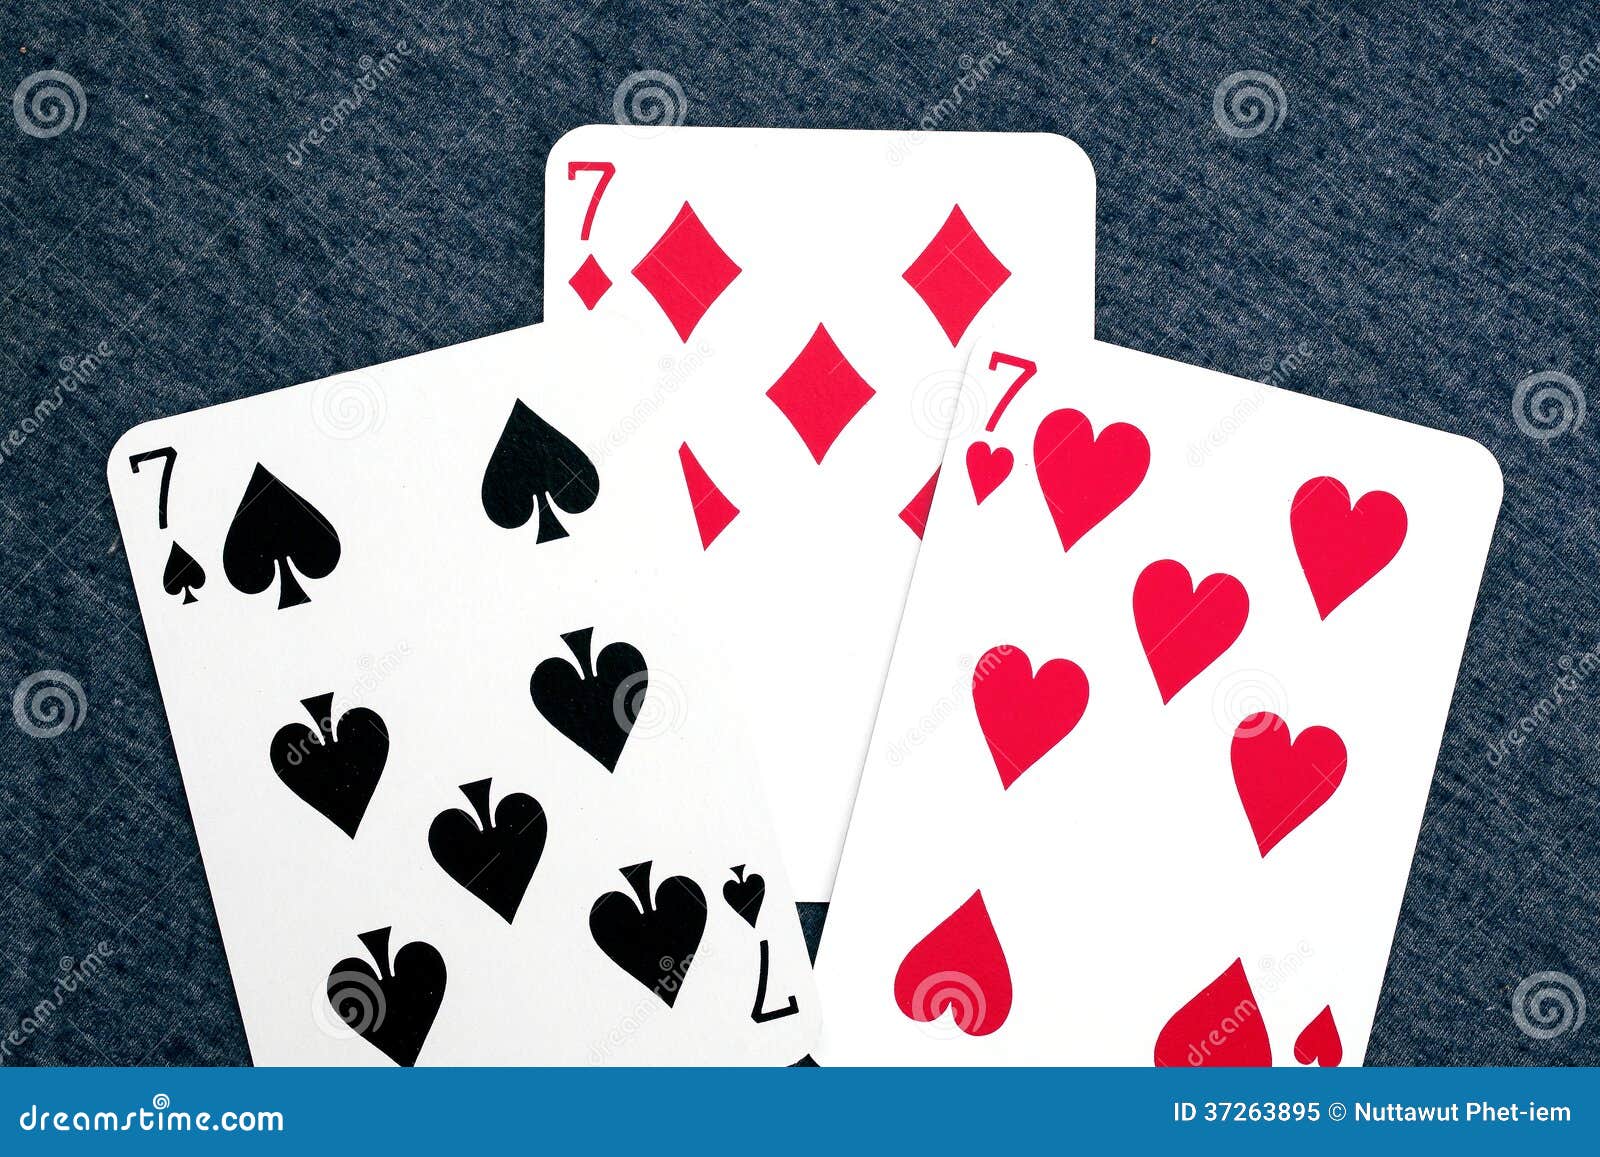 69,500+ Hearts Playing Card Stock Photos, Pictures & Royalty-Free